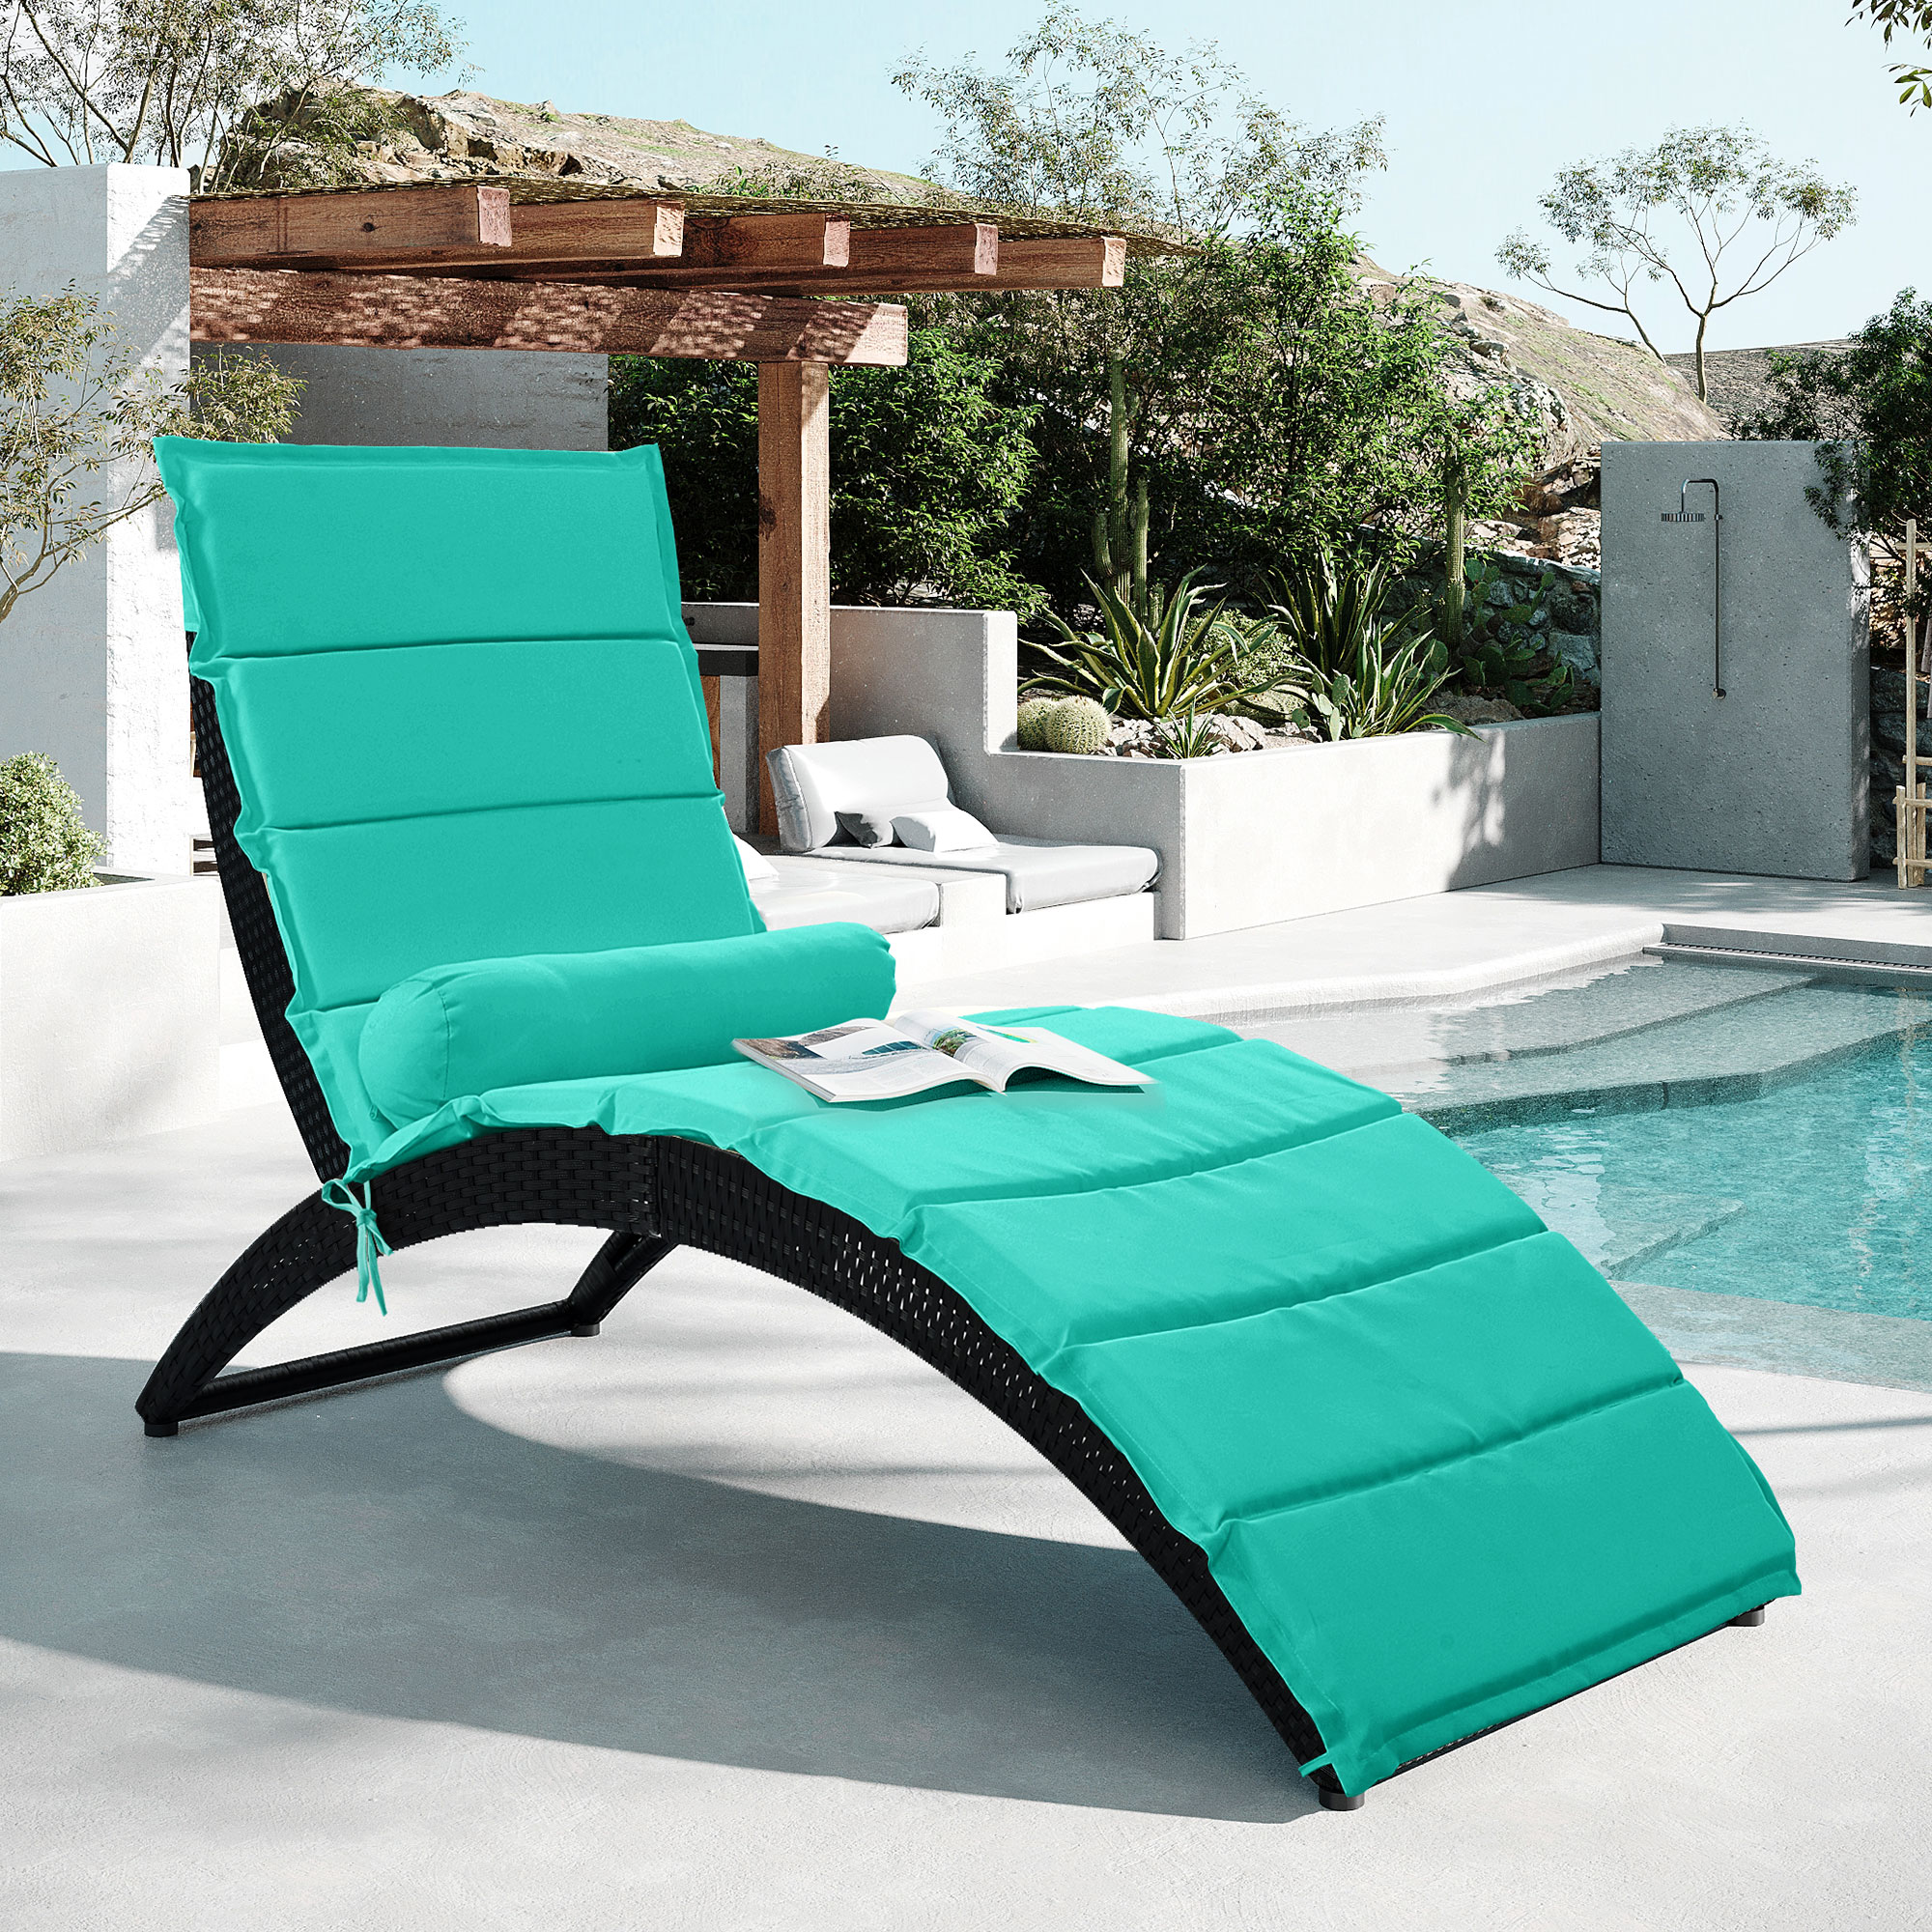 Outdoor Chaise Lounge Chair, Patio Reclining Sun Lounger, PE Wicker Rattan Foldable Lounge Chair with Steel Frame, Cushions, and Bolster Pillow, Reclining Chair for Poolside, Deck, Backyard, Blue - image 1 of 9